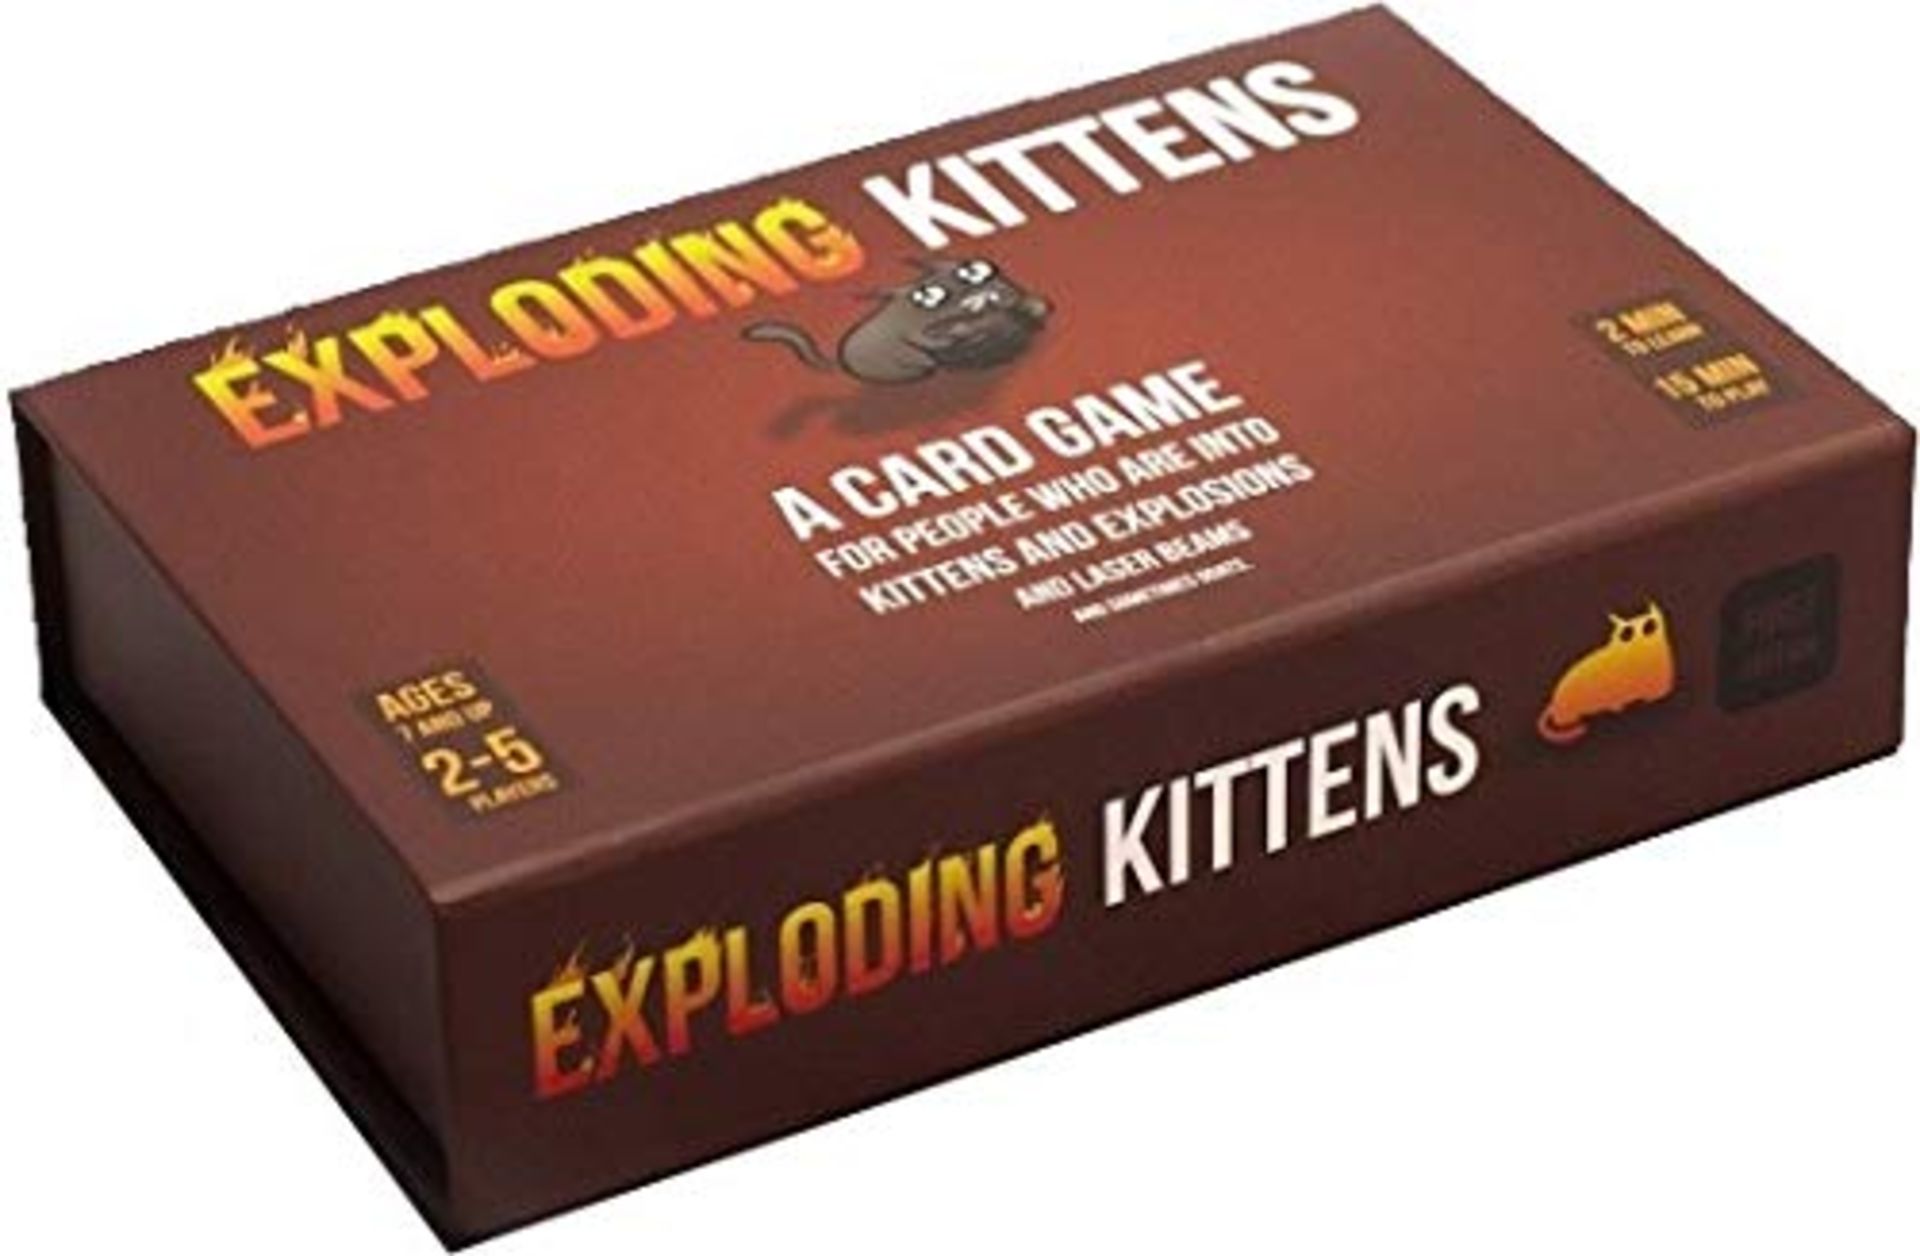 48 x Exploding Kittens Card Game | 852131006006 | RRP £1,692.00